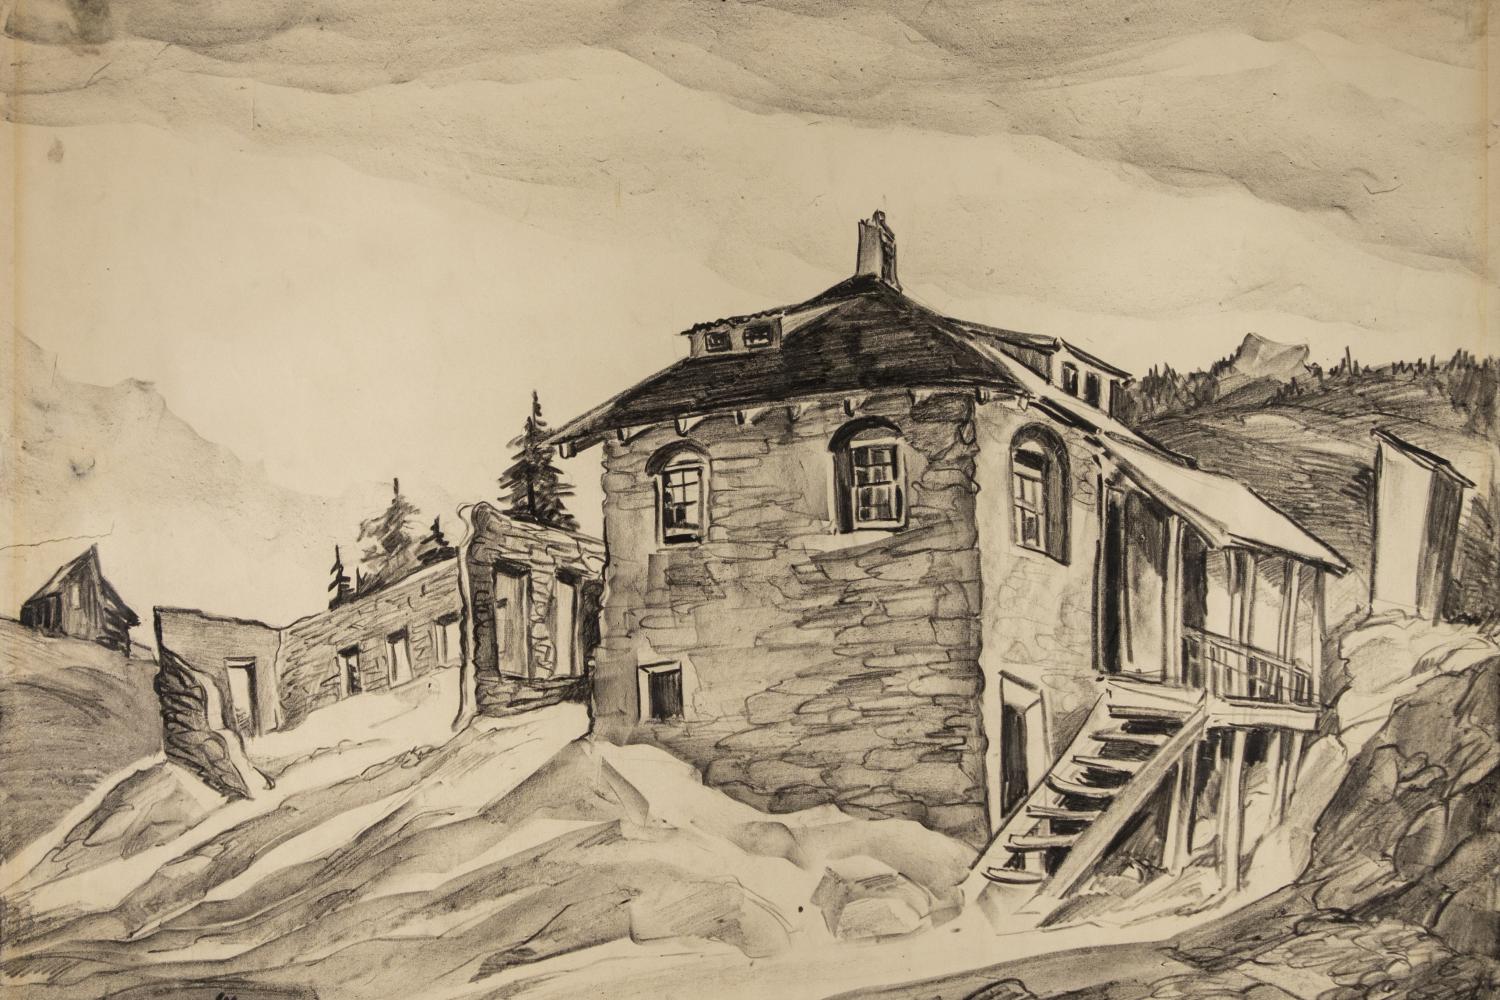 Pencil drawing of a post office in the mountains